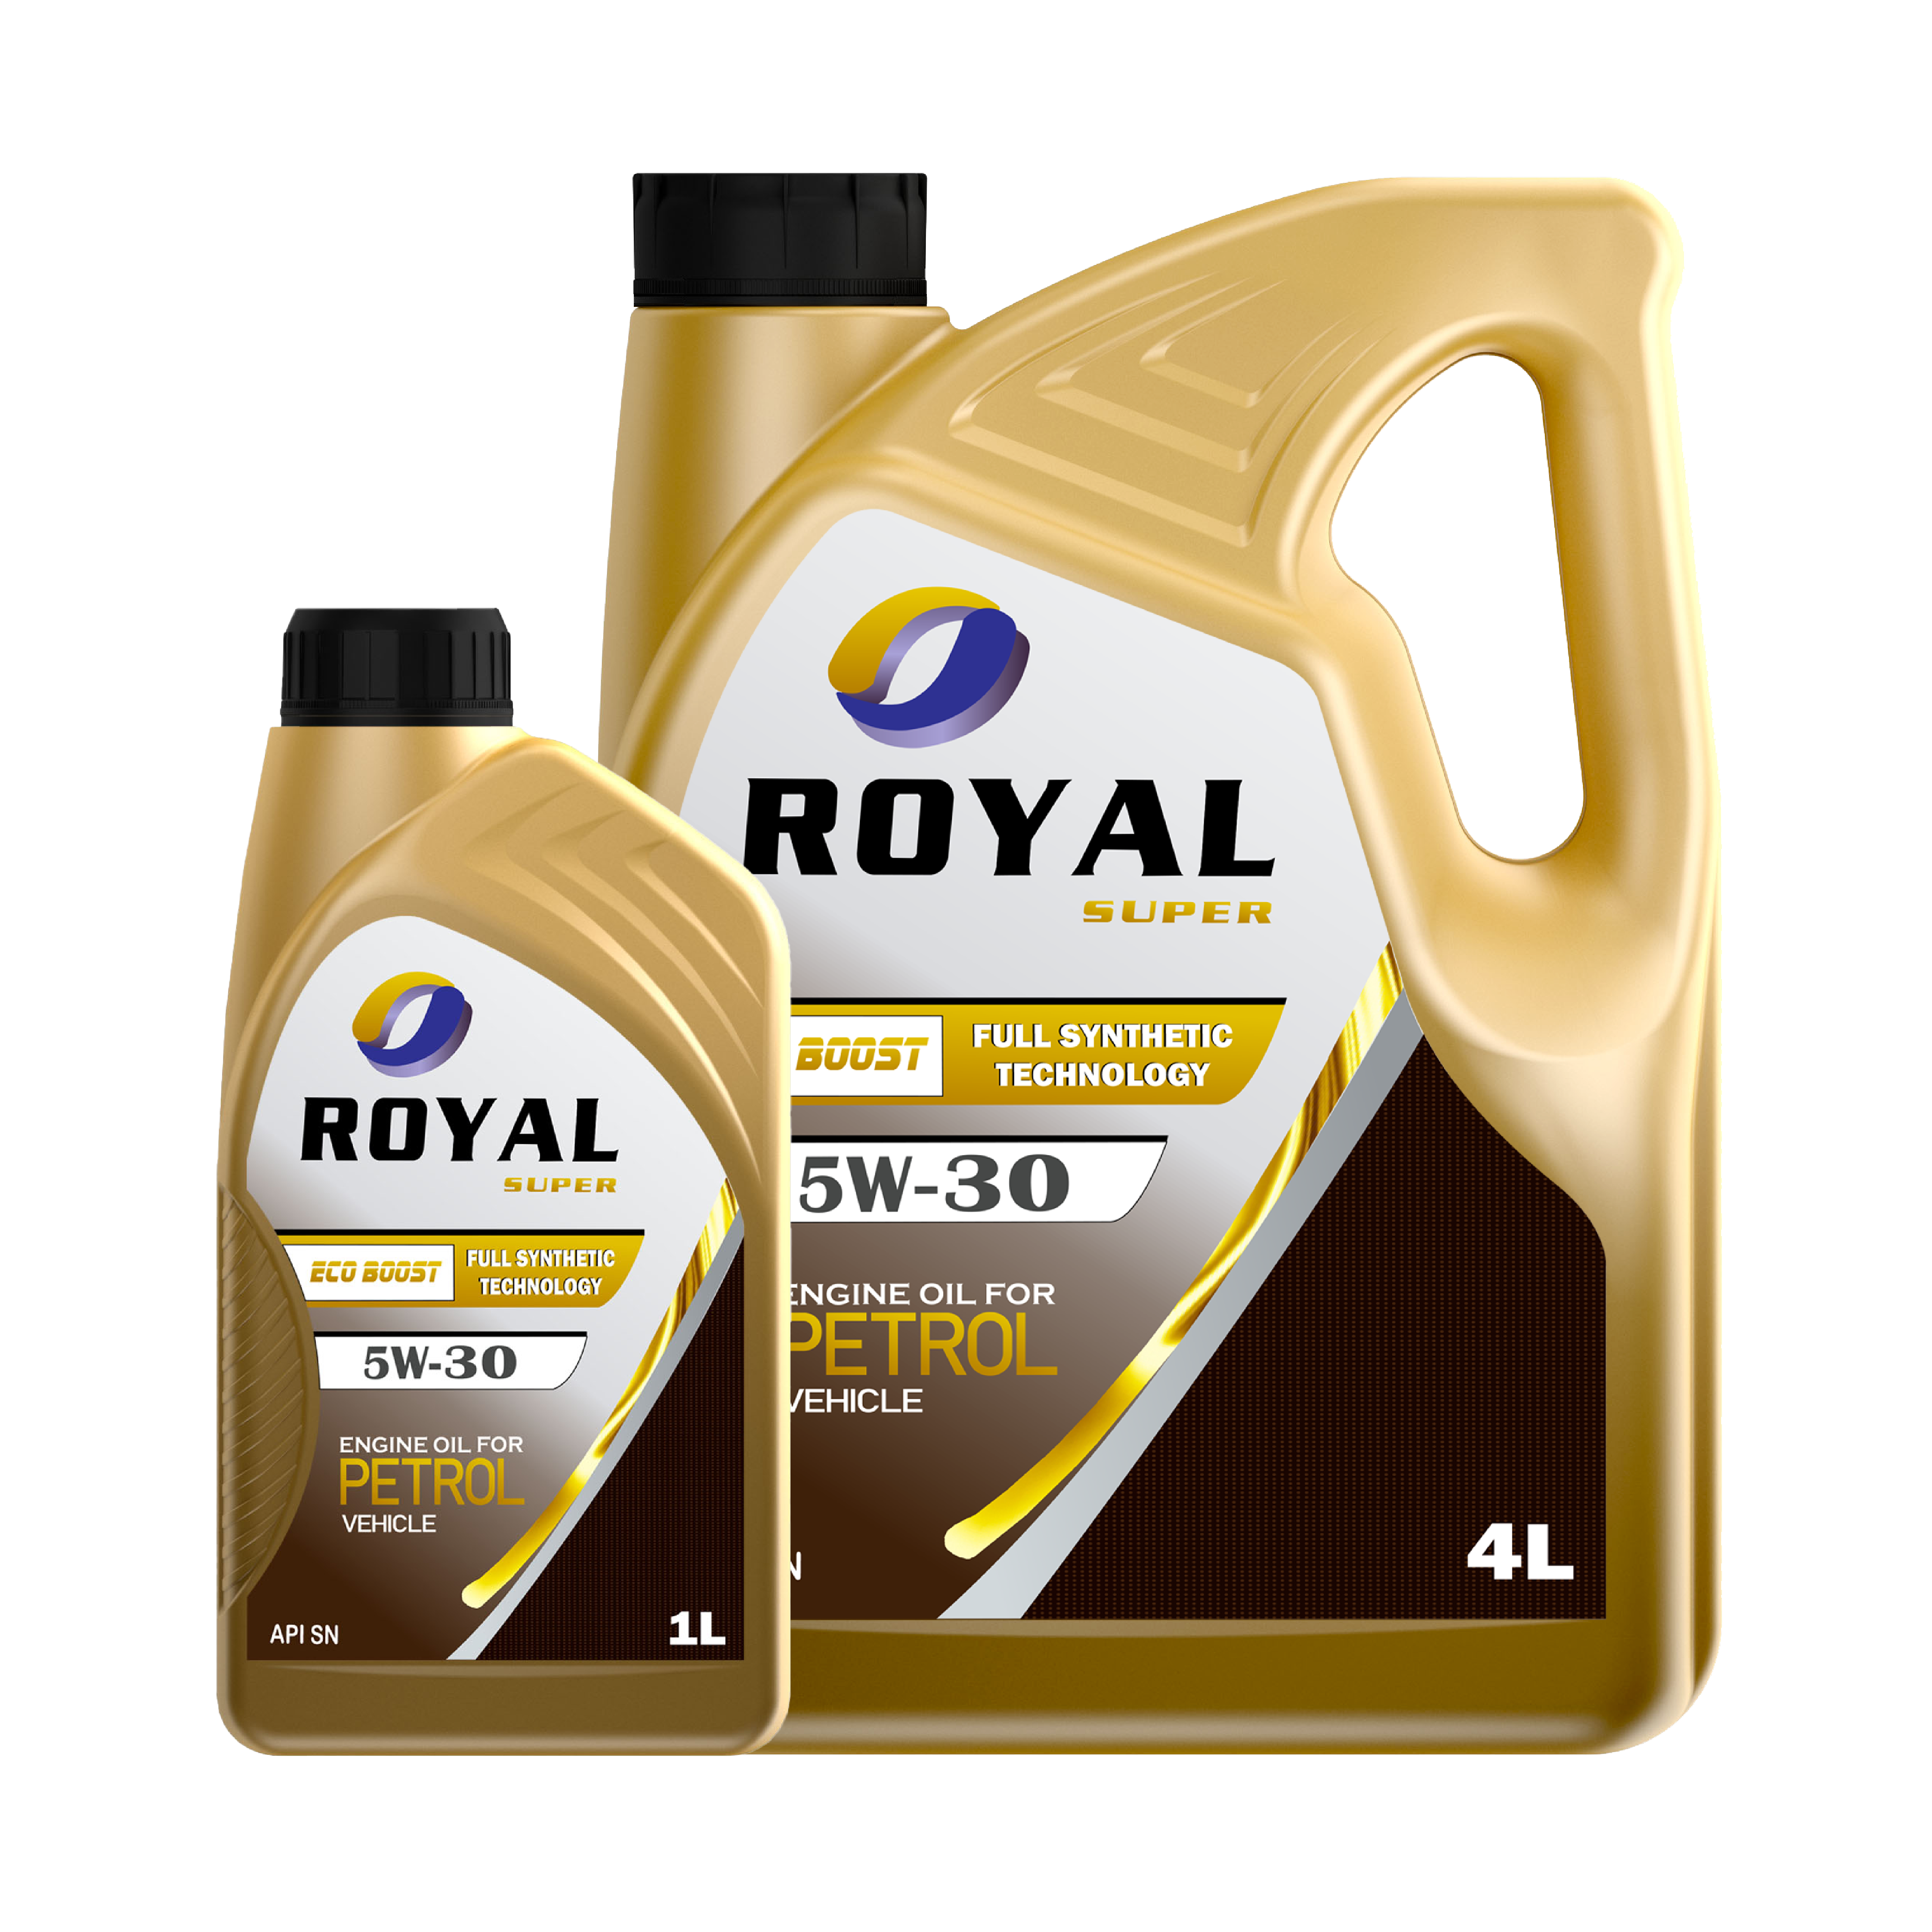 Royal Super Lubricants oil suppliers